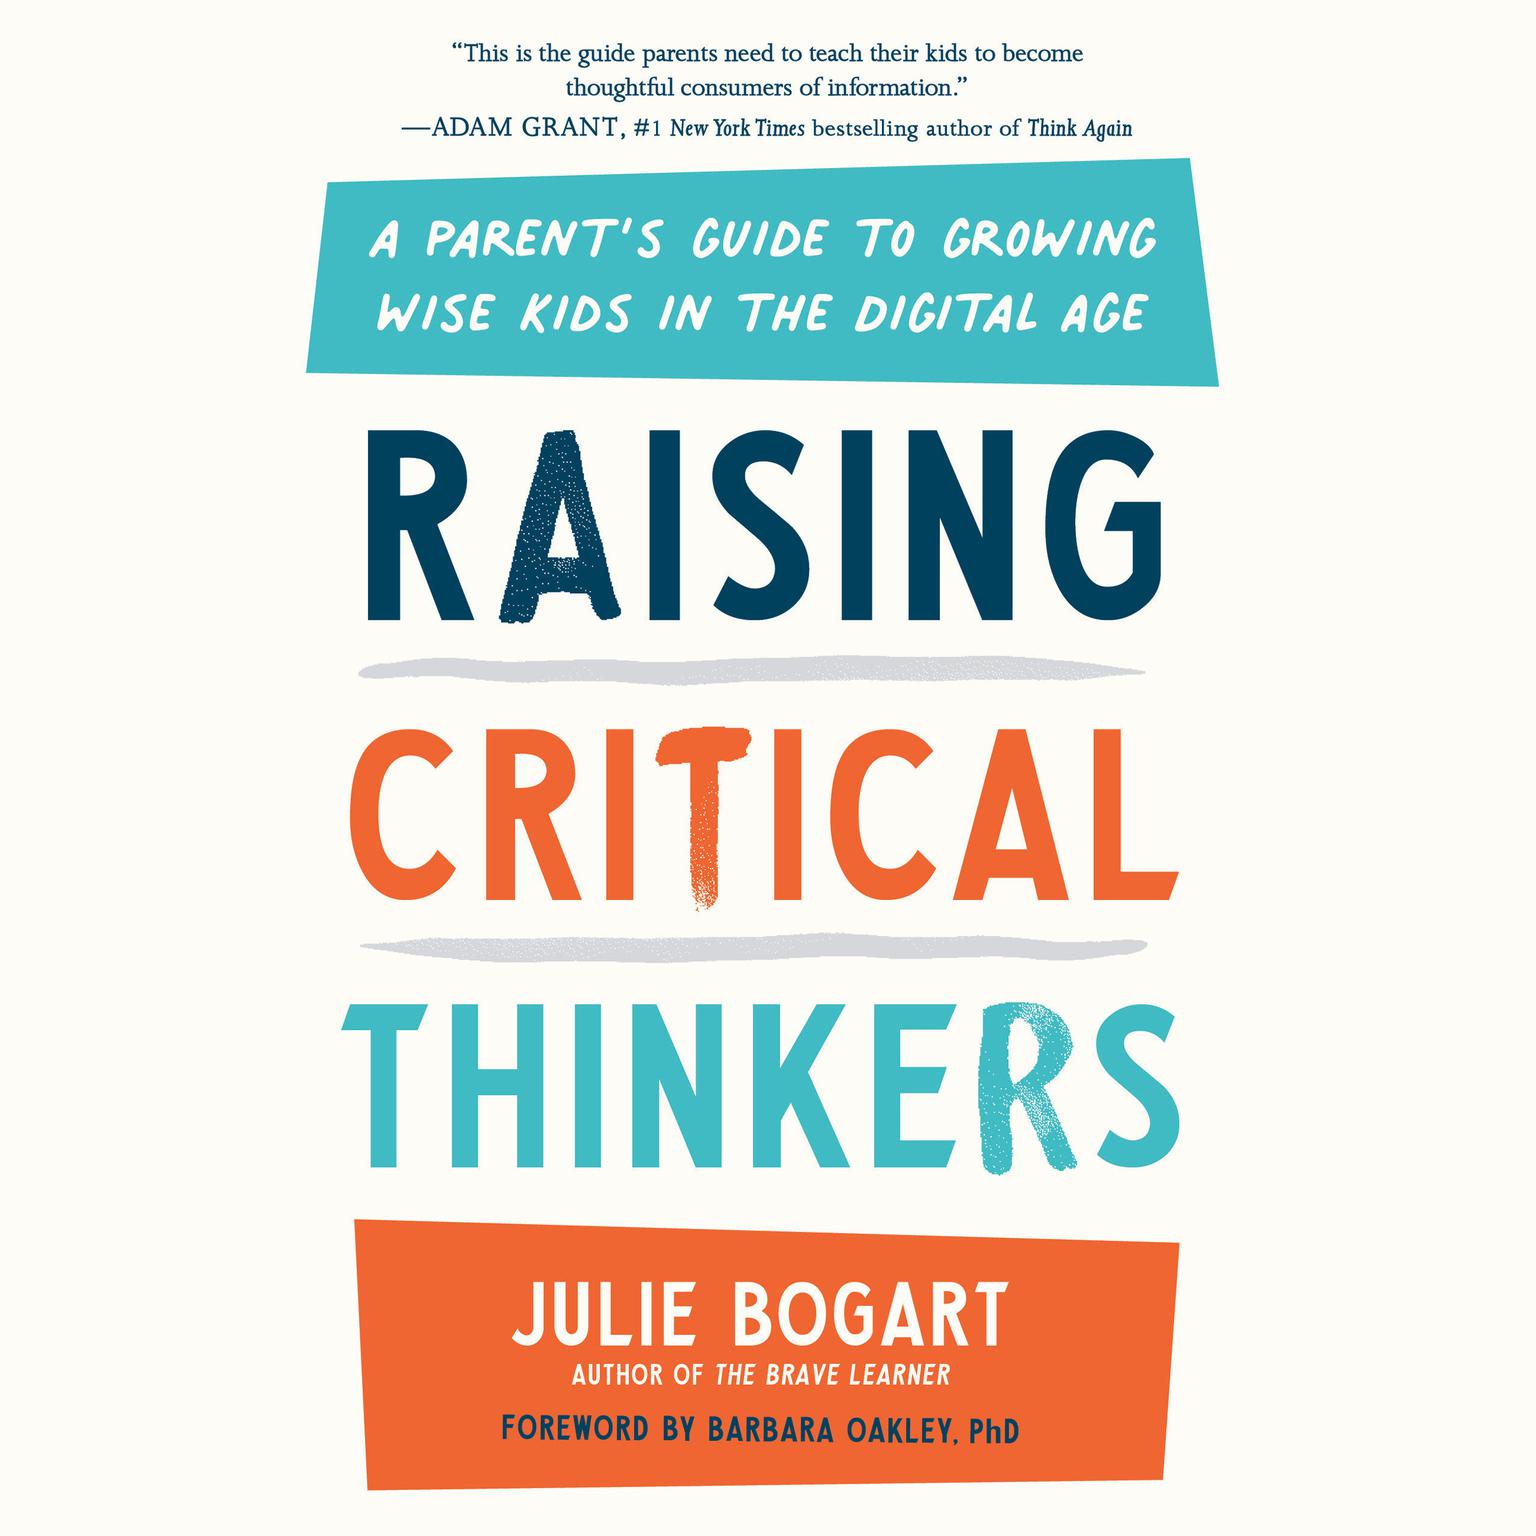 Raising Critical Thinkers: A Parents Guide to Growing Wise Kids in the Digital Age Audiobook, by Julie Bogart